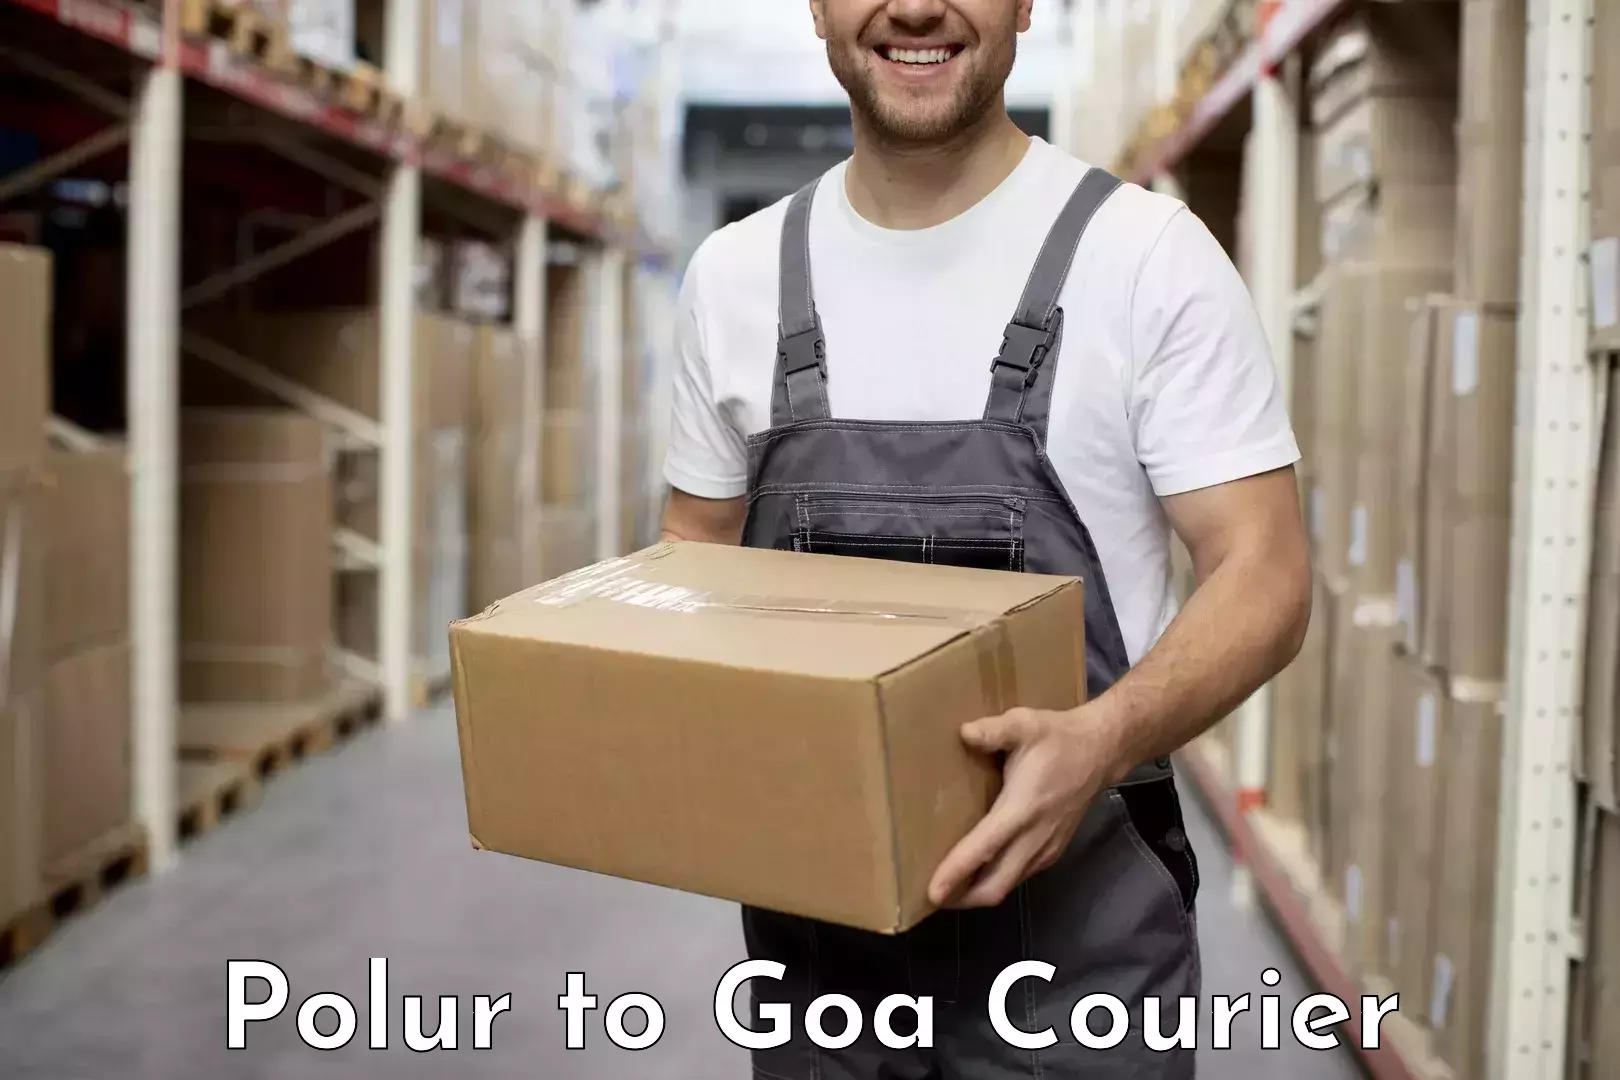 Sustainable delivery practices Polur to Goa